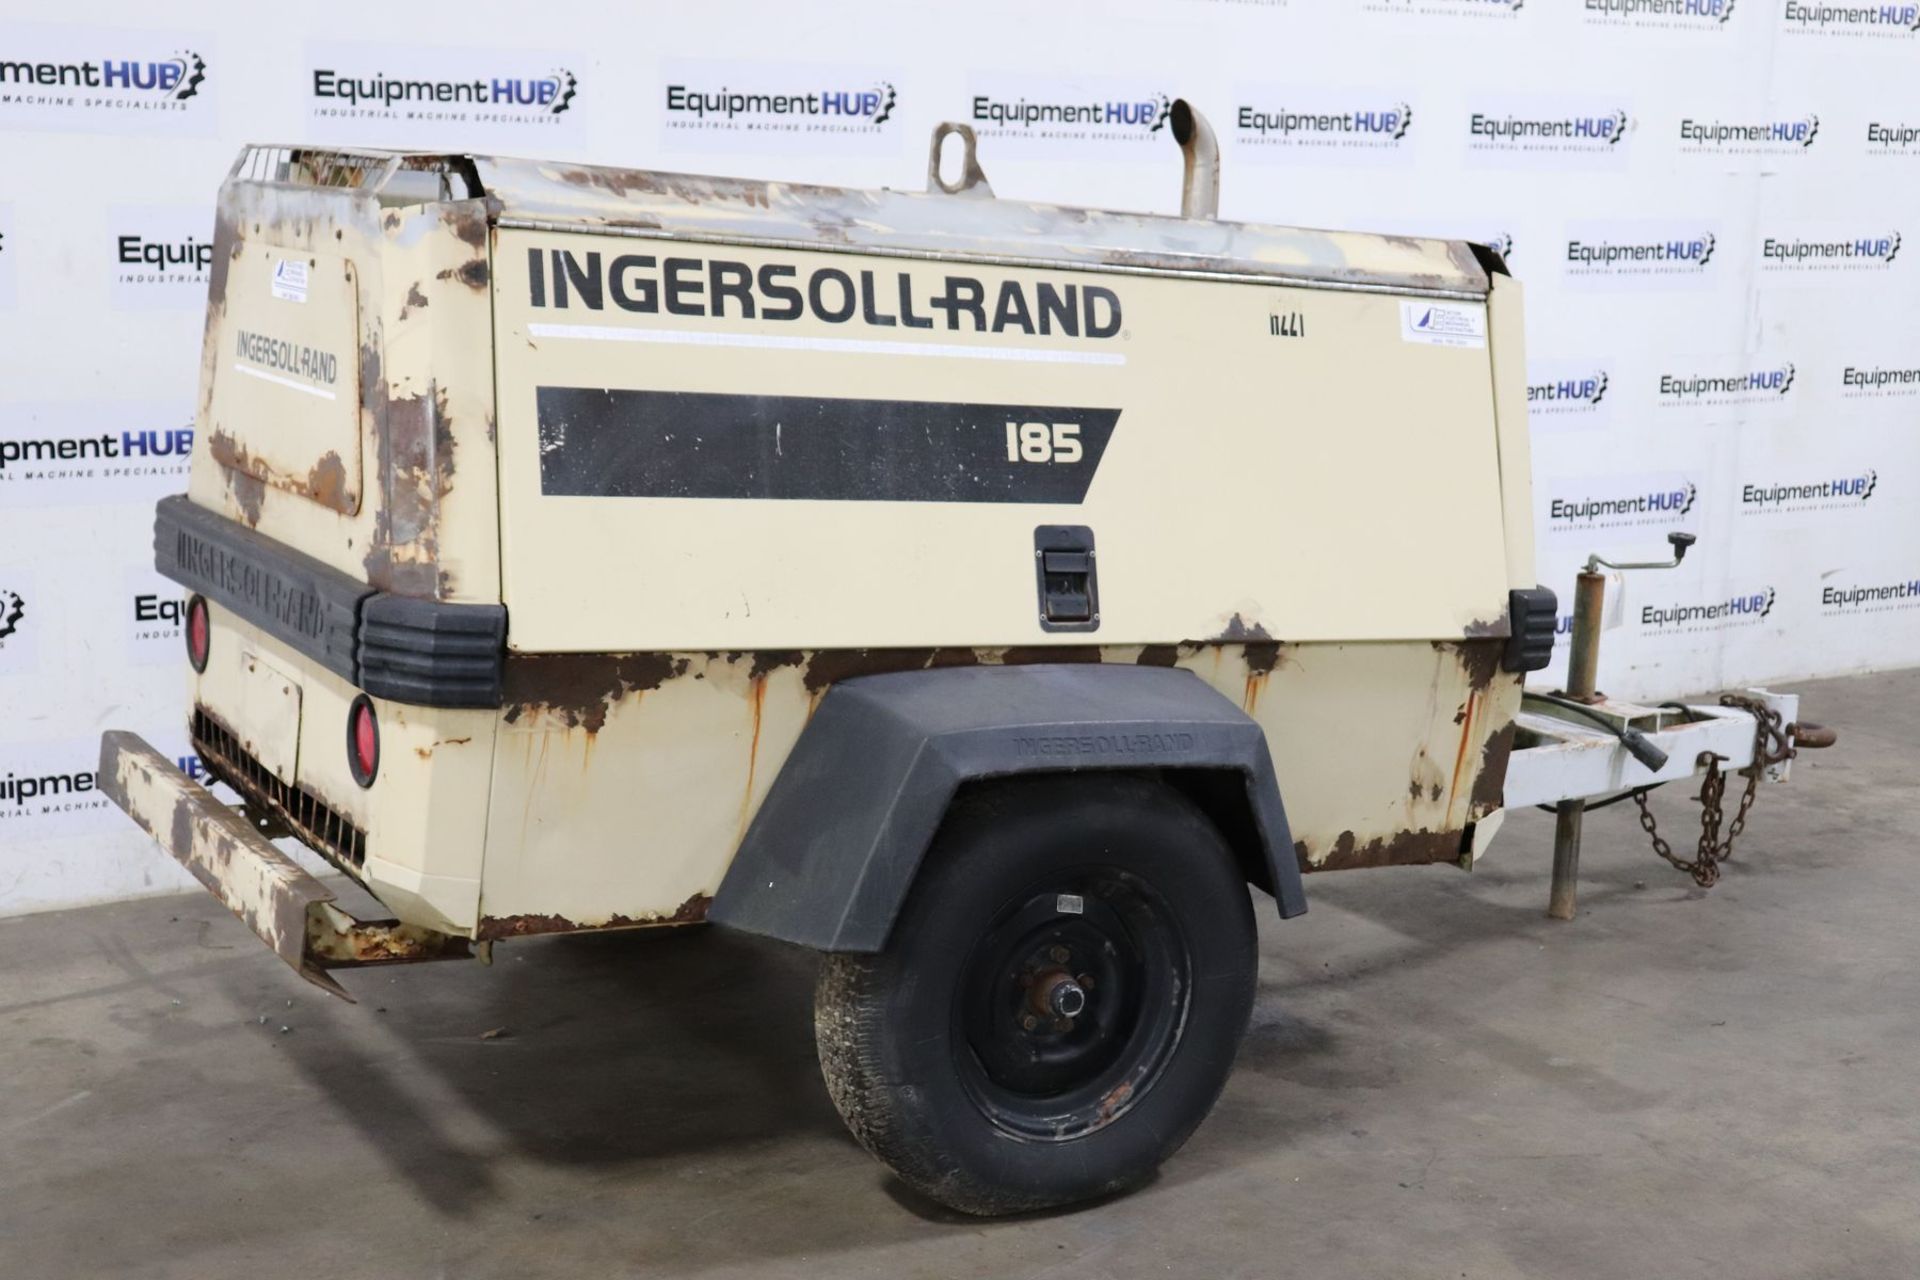 Ingersoll Rand P185WJD 185 CFM Portable Towable Air Compressor - Image 3 of 14